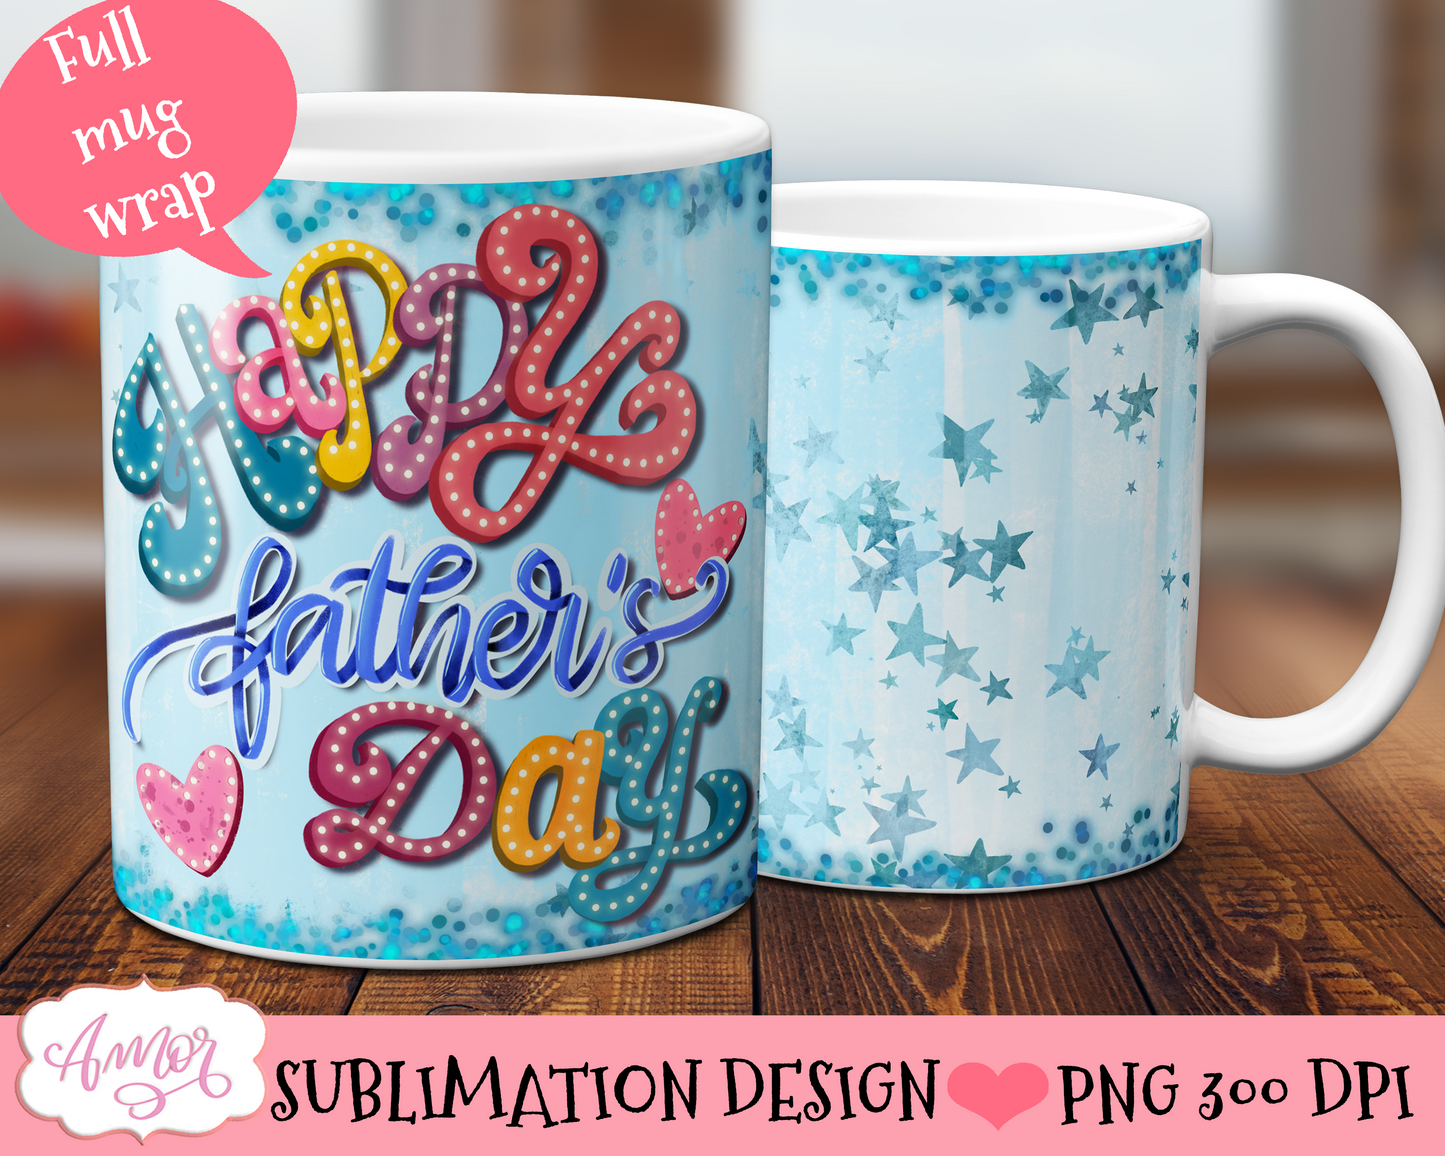 Photo mug wrap sublimation design for Father's day